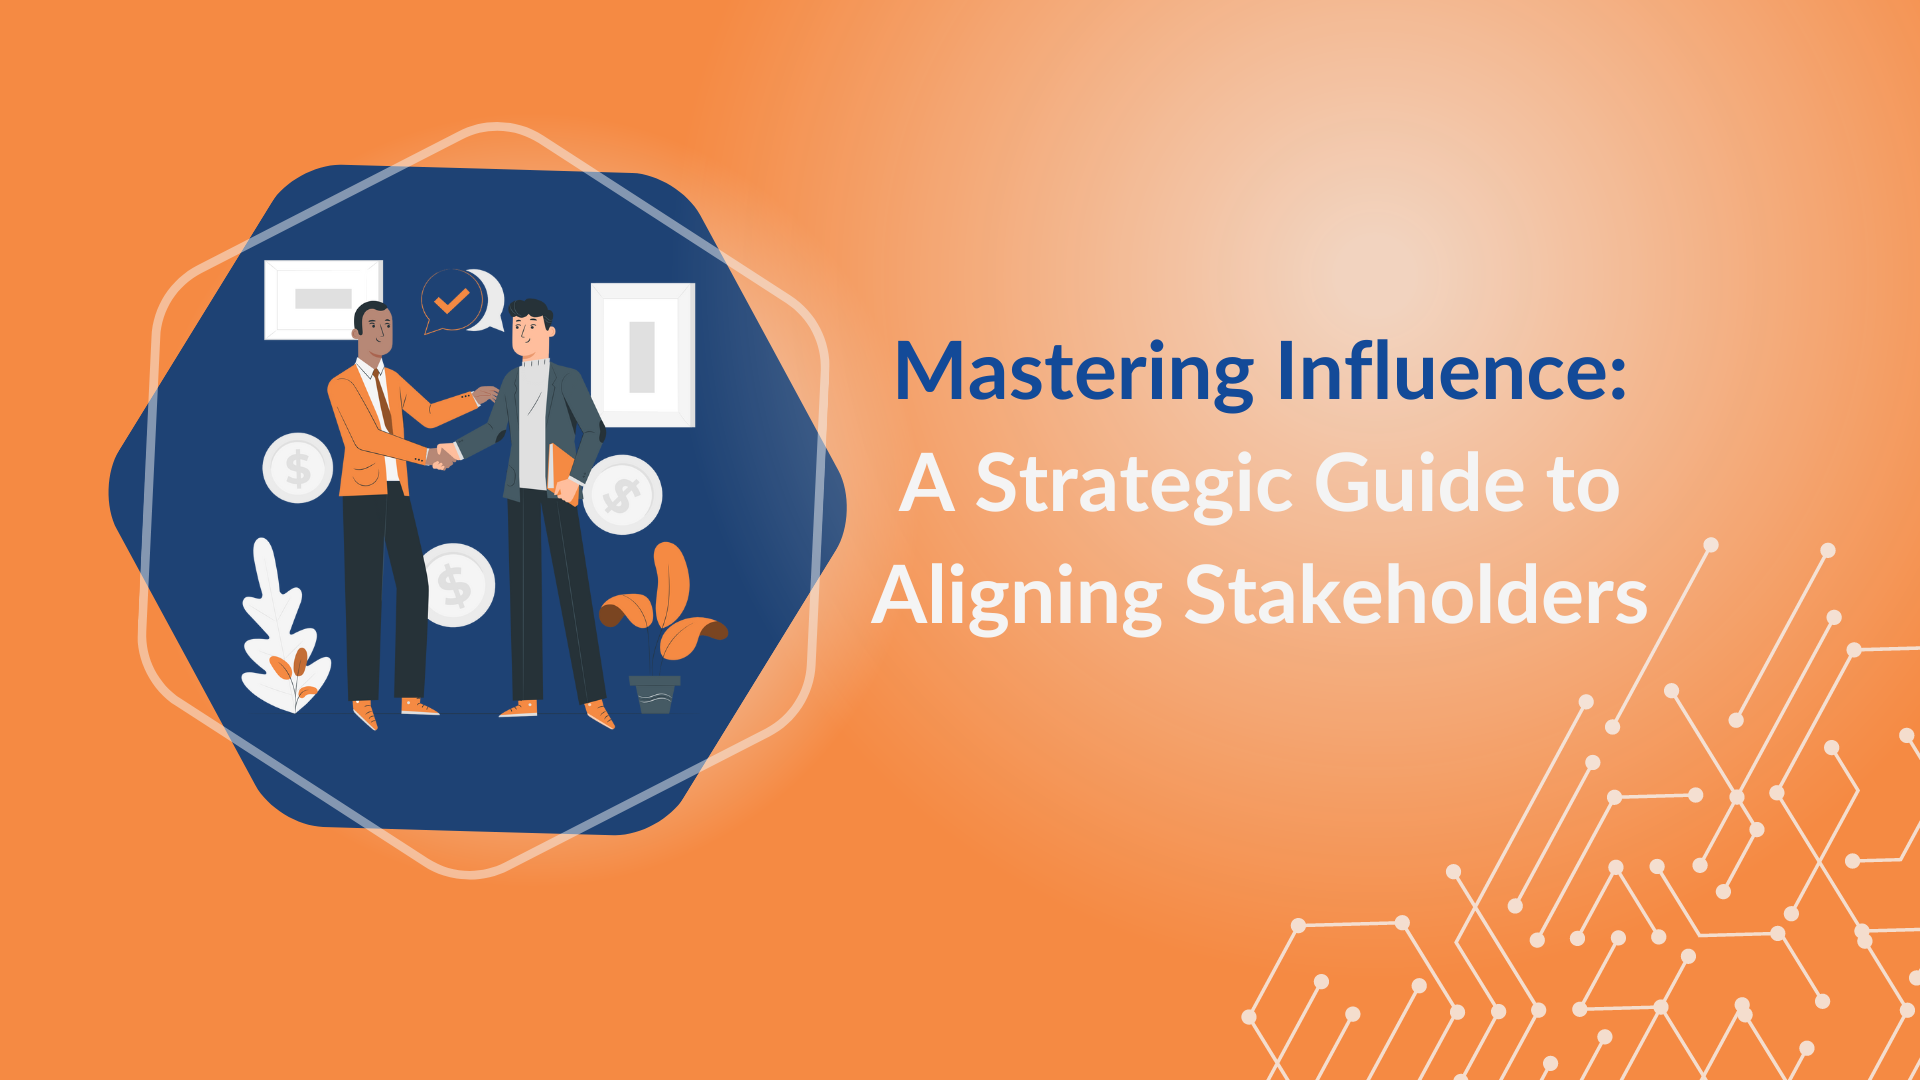 Mastering Influence: A Strategic Guide to Aligning Stakeholders